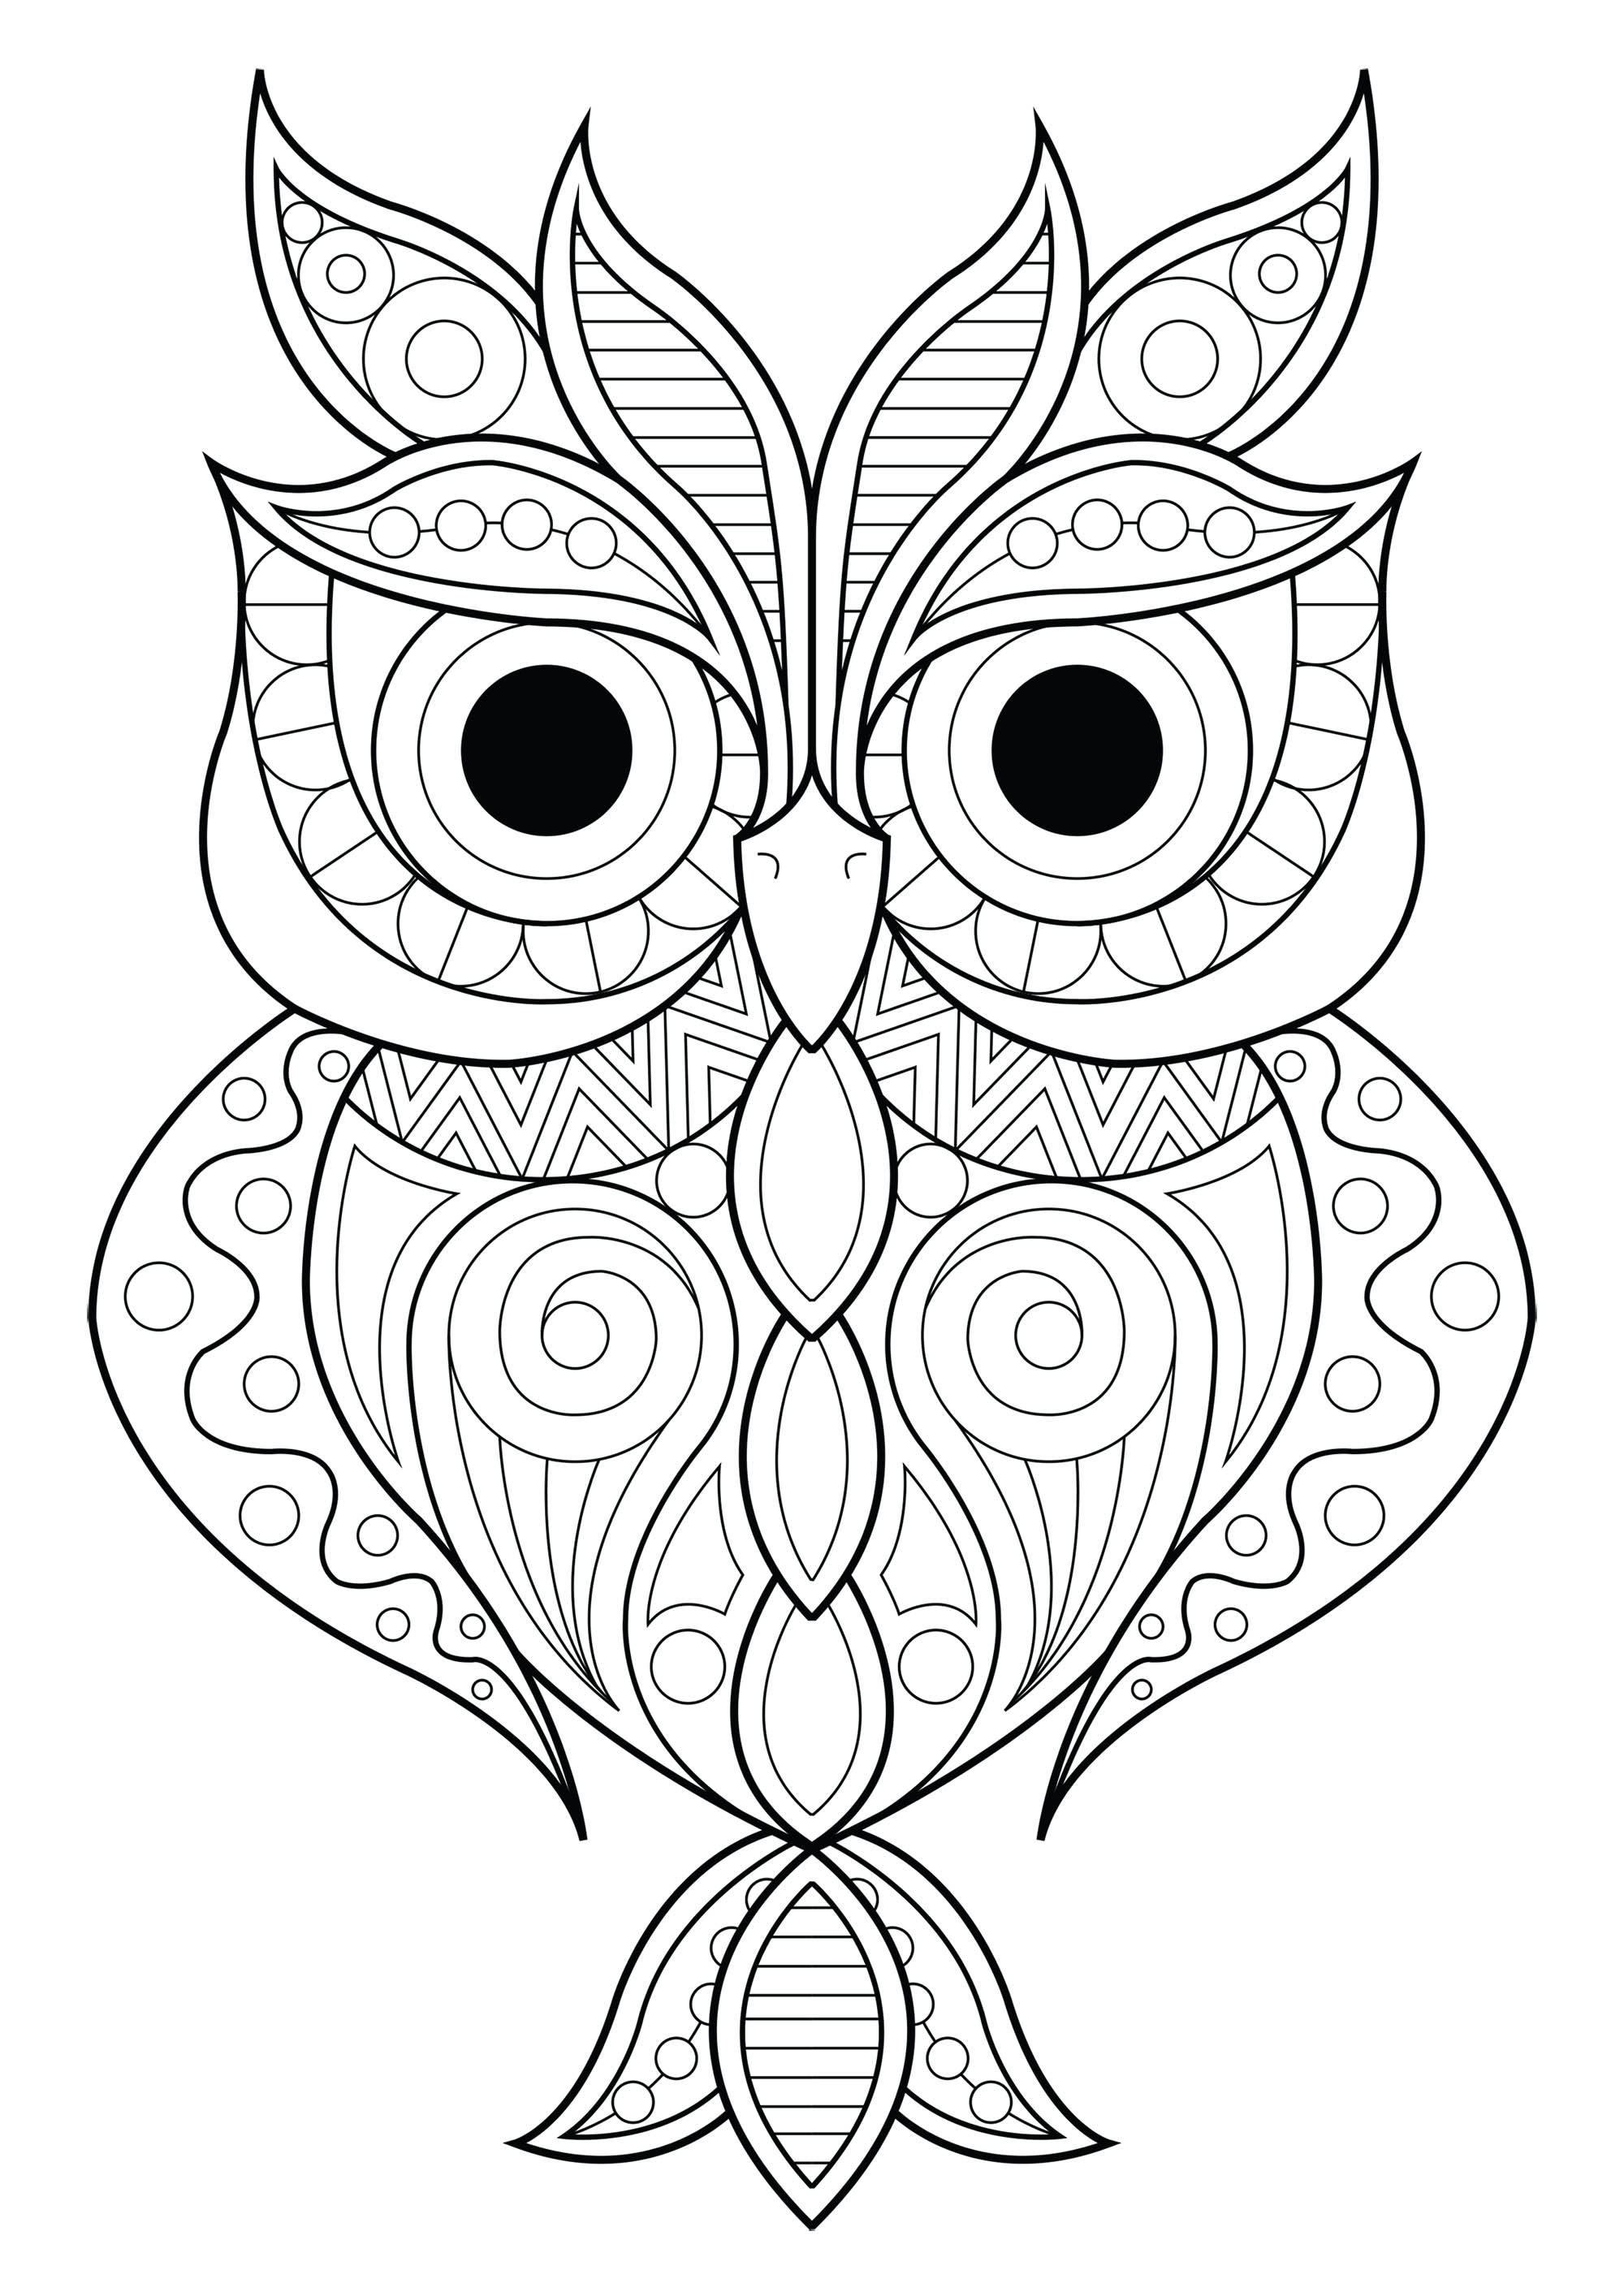 Owl with various different patterns, Artist : Lucie